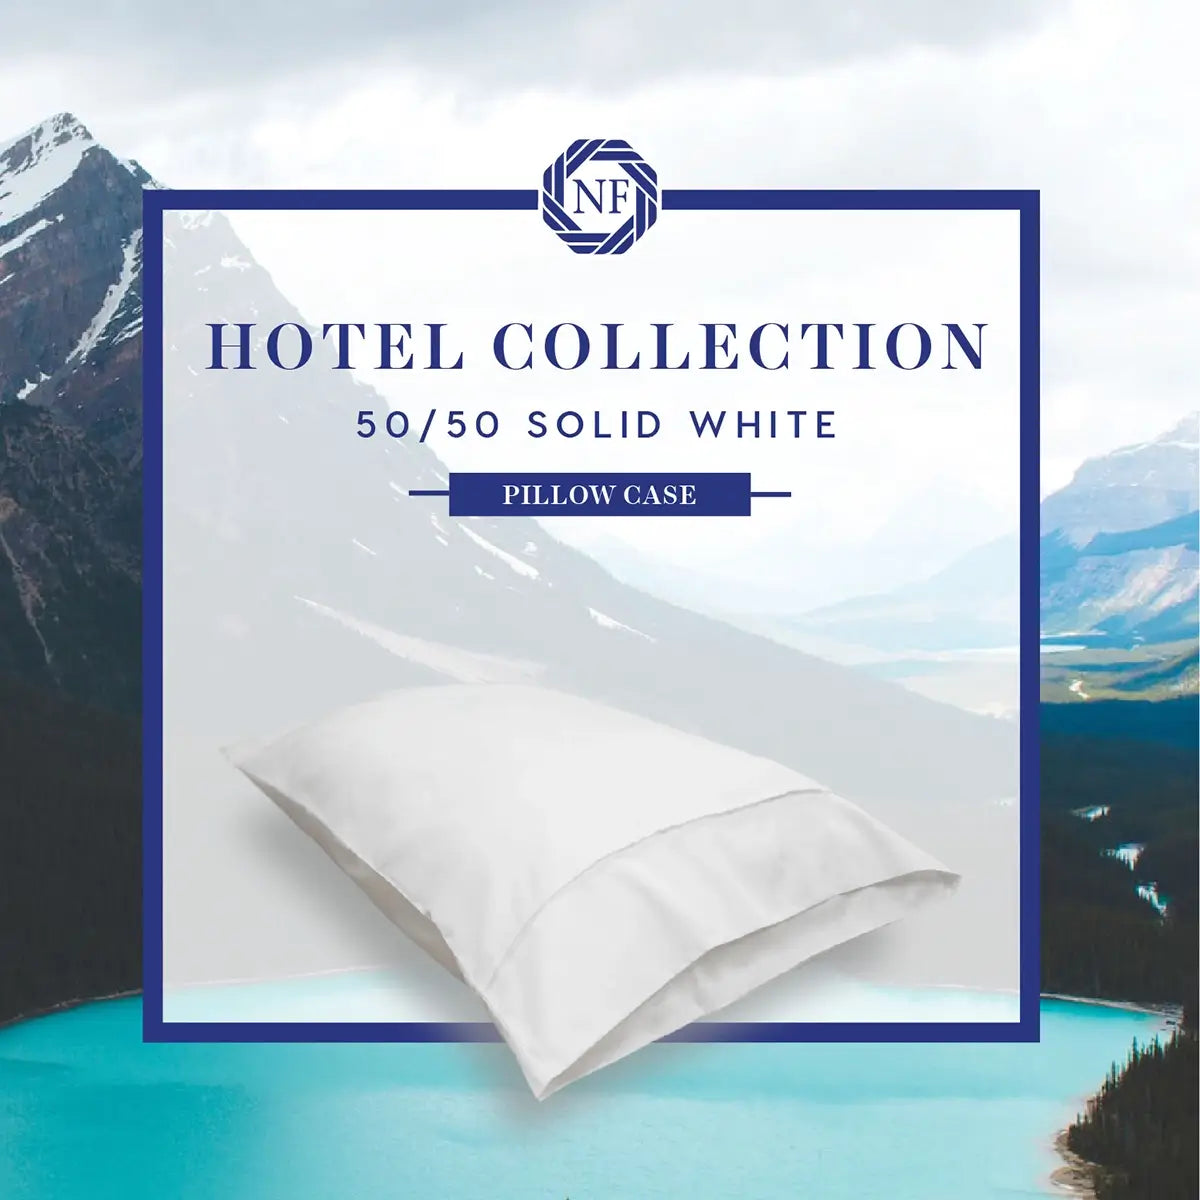 Hotel Collection - 50/50 Solid White Linen Pillow Case - Northern Feather Canada eStore